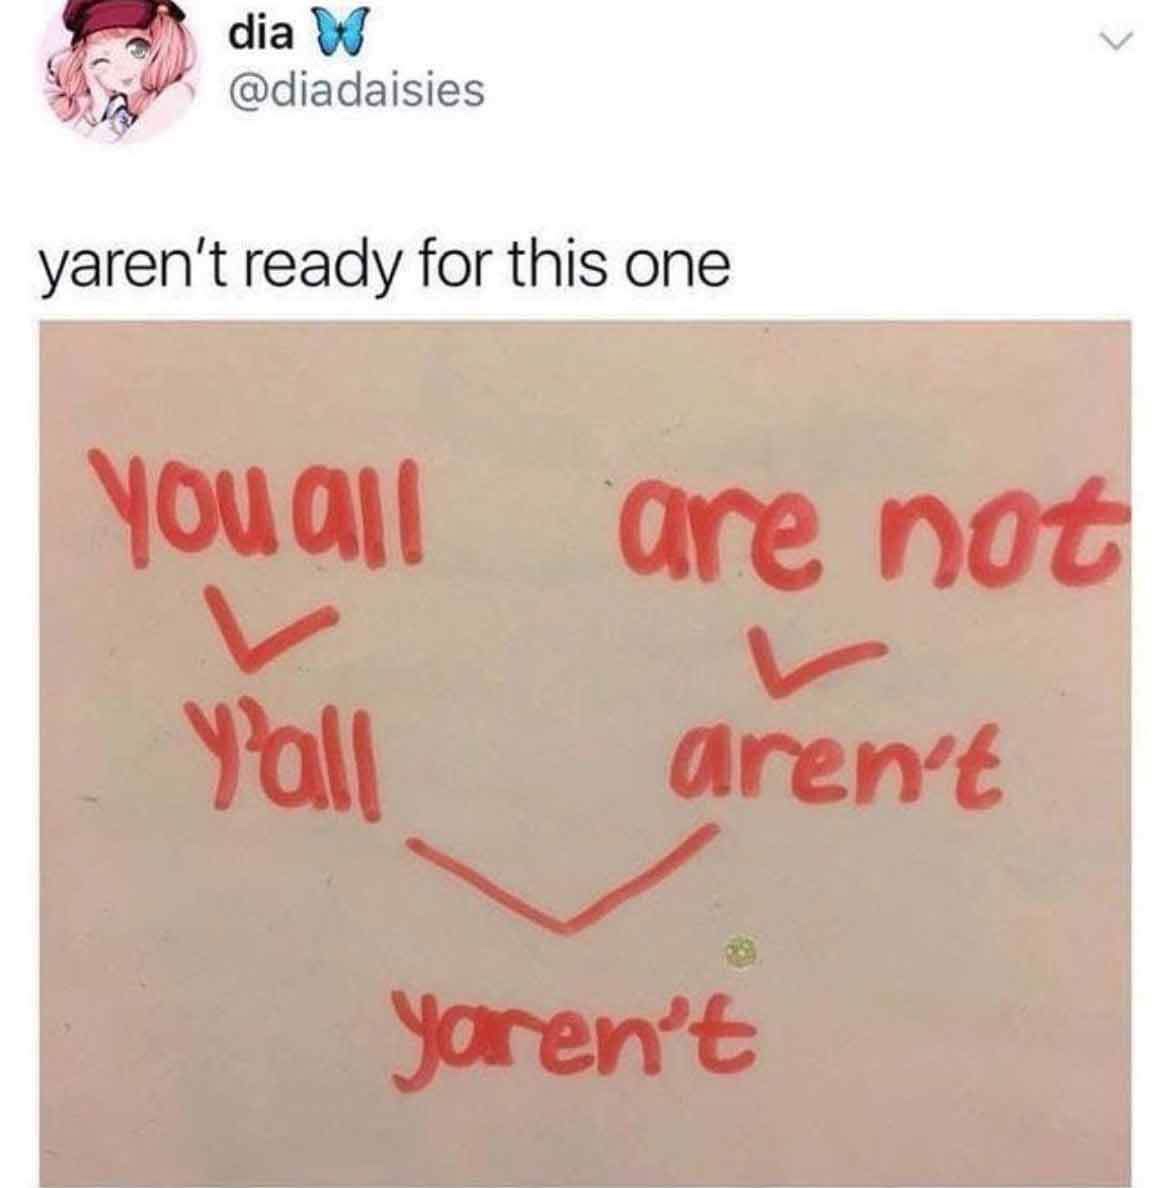 new memes august 2019 - dia w yaren't ready for this one you all are not Yall aren't Yaren't